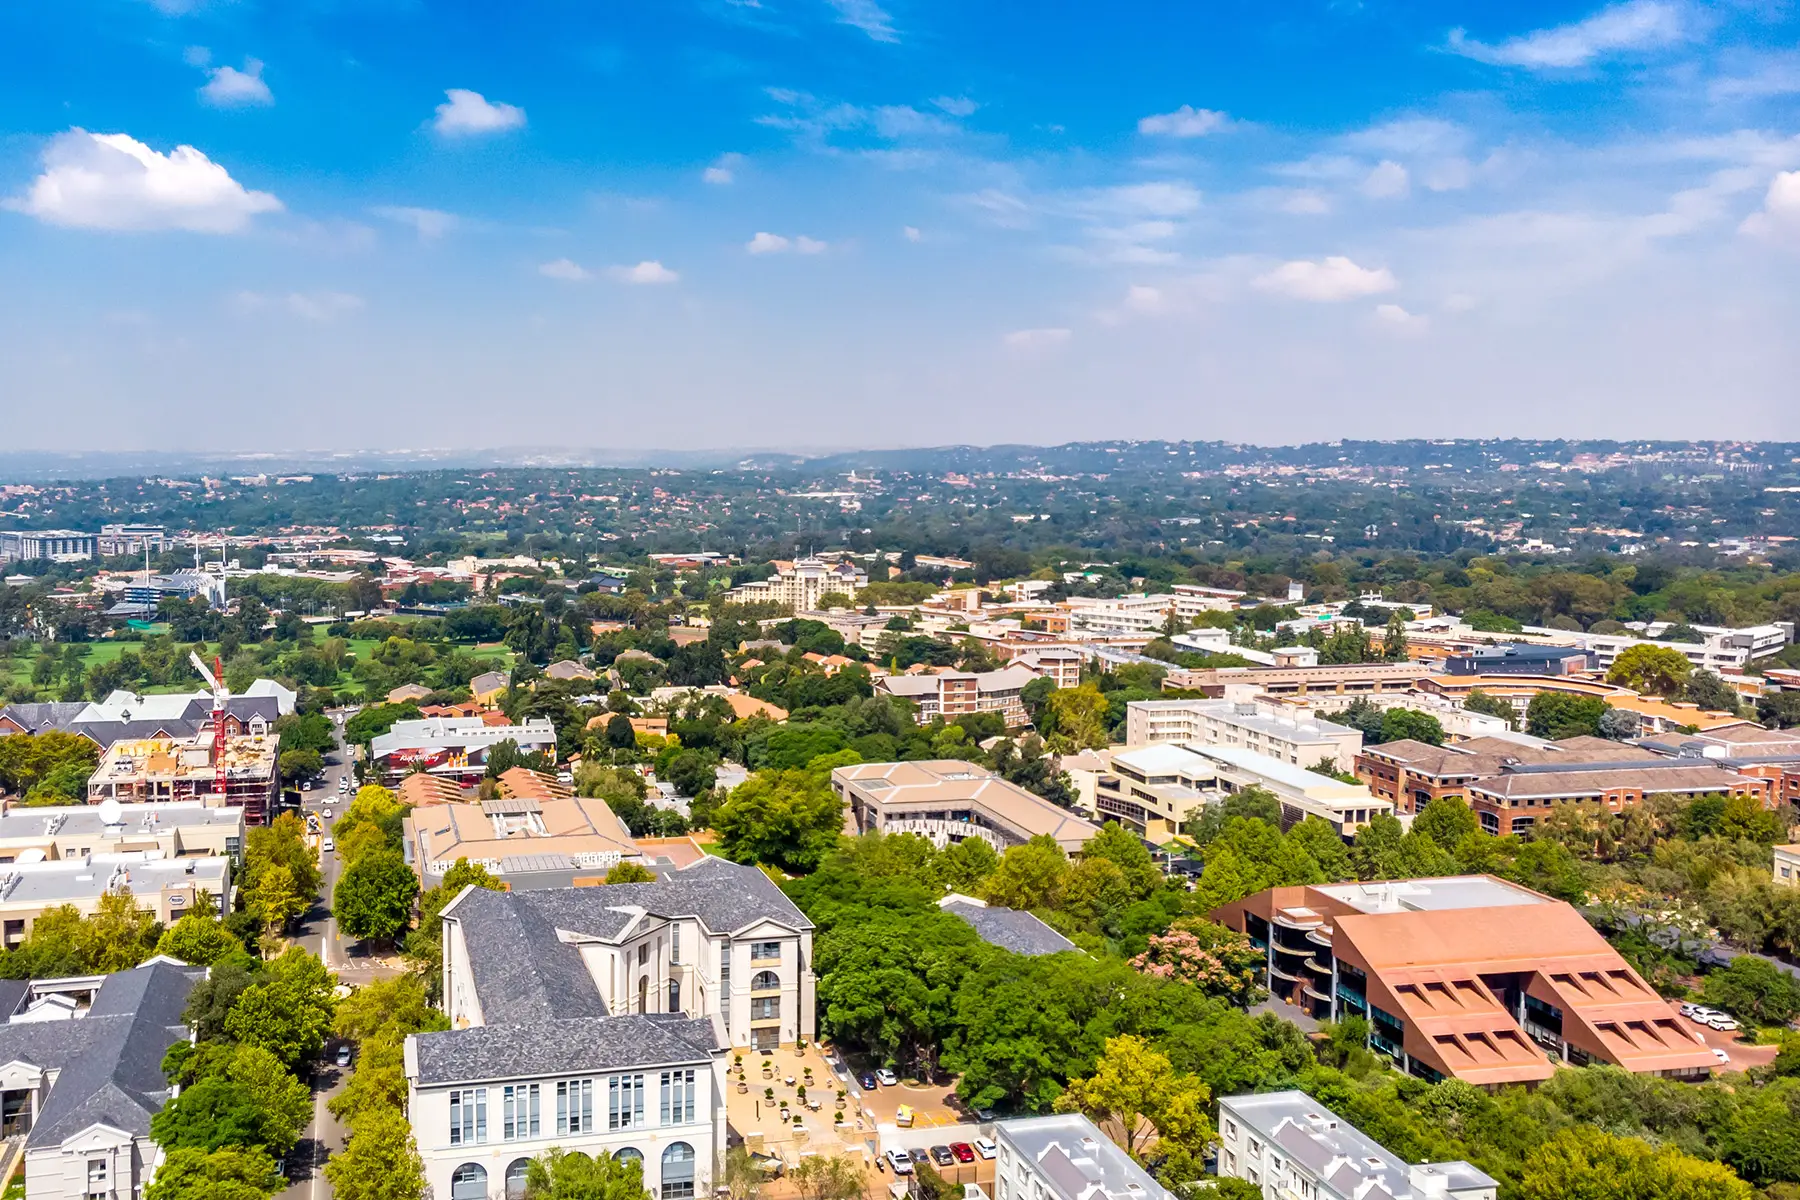 Aerial view of Johannesburg